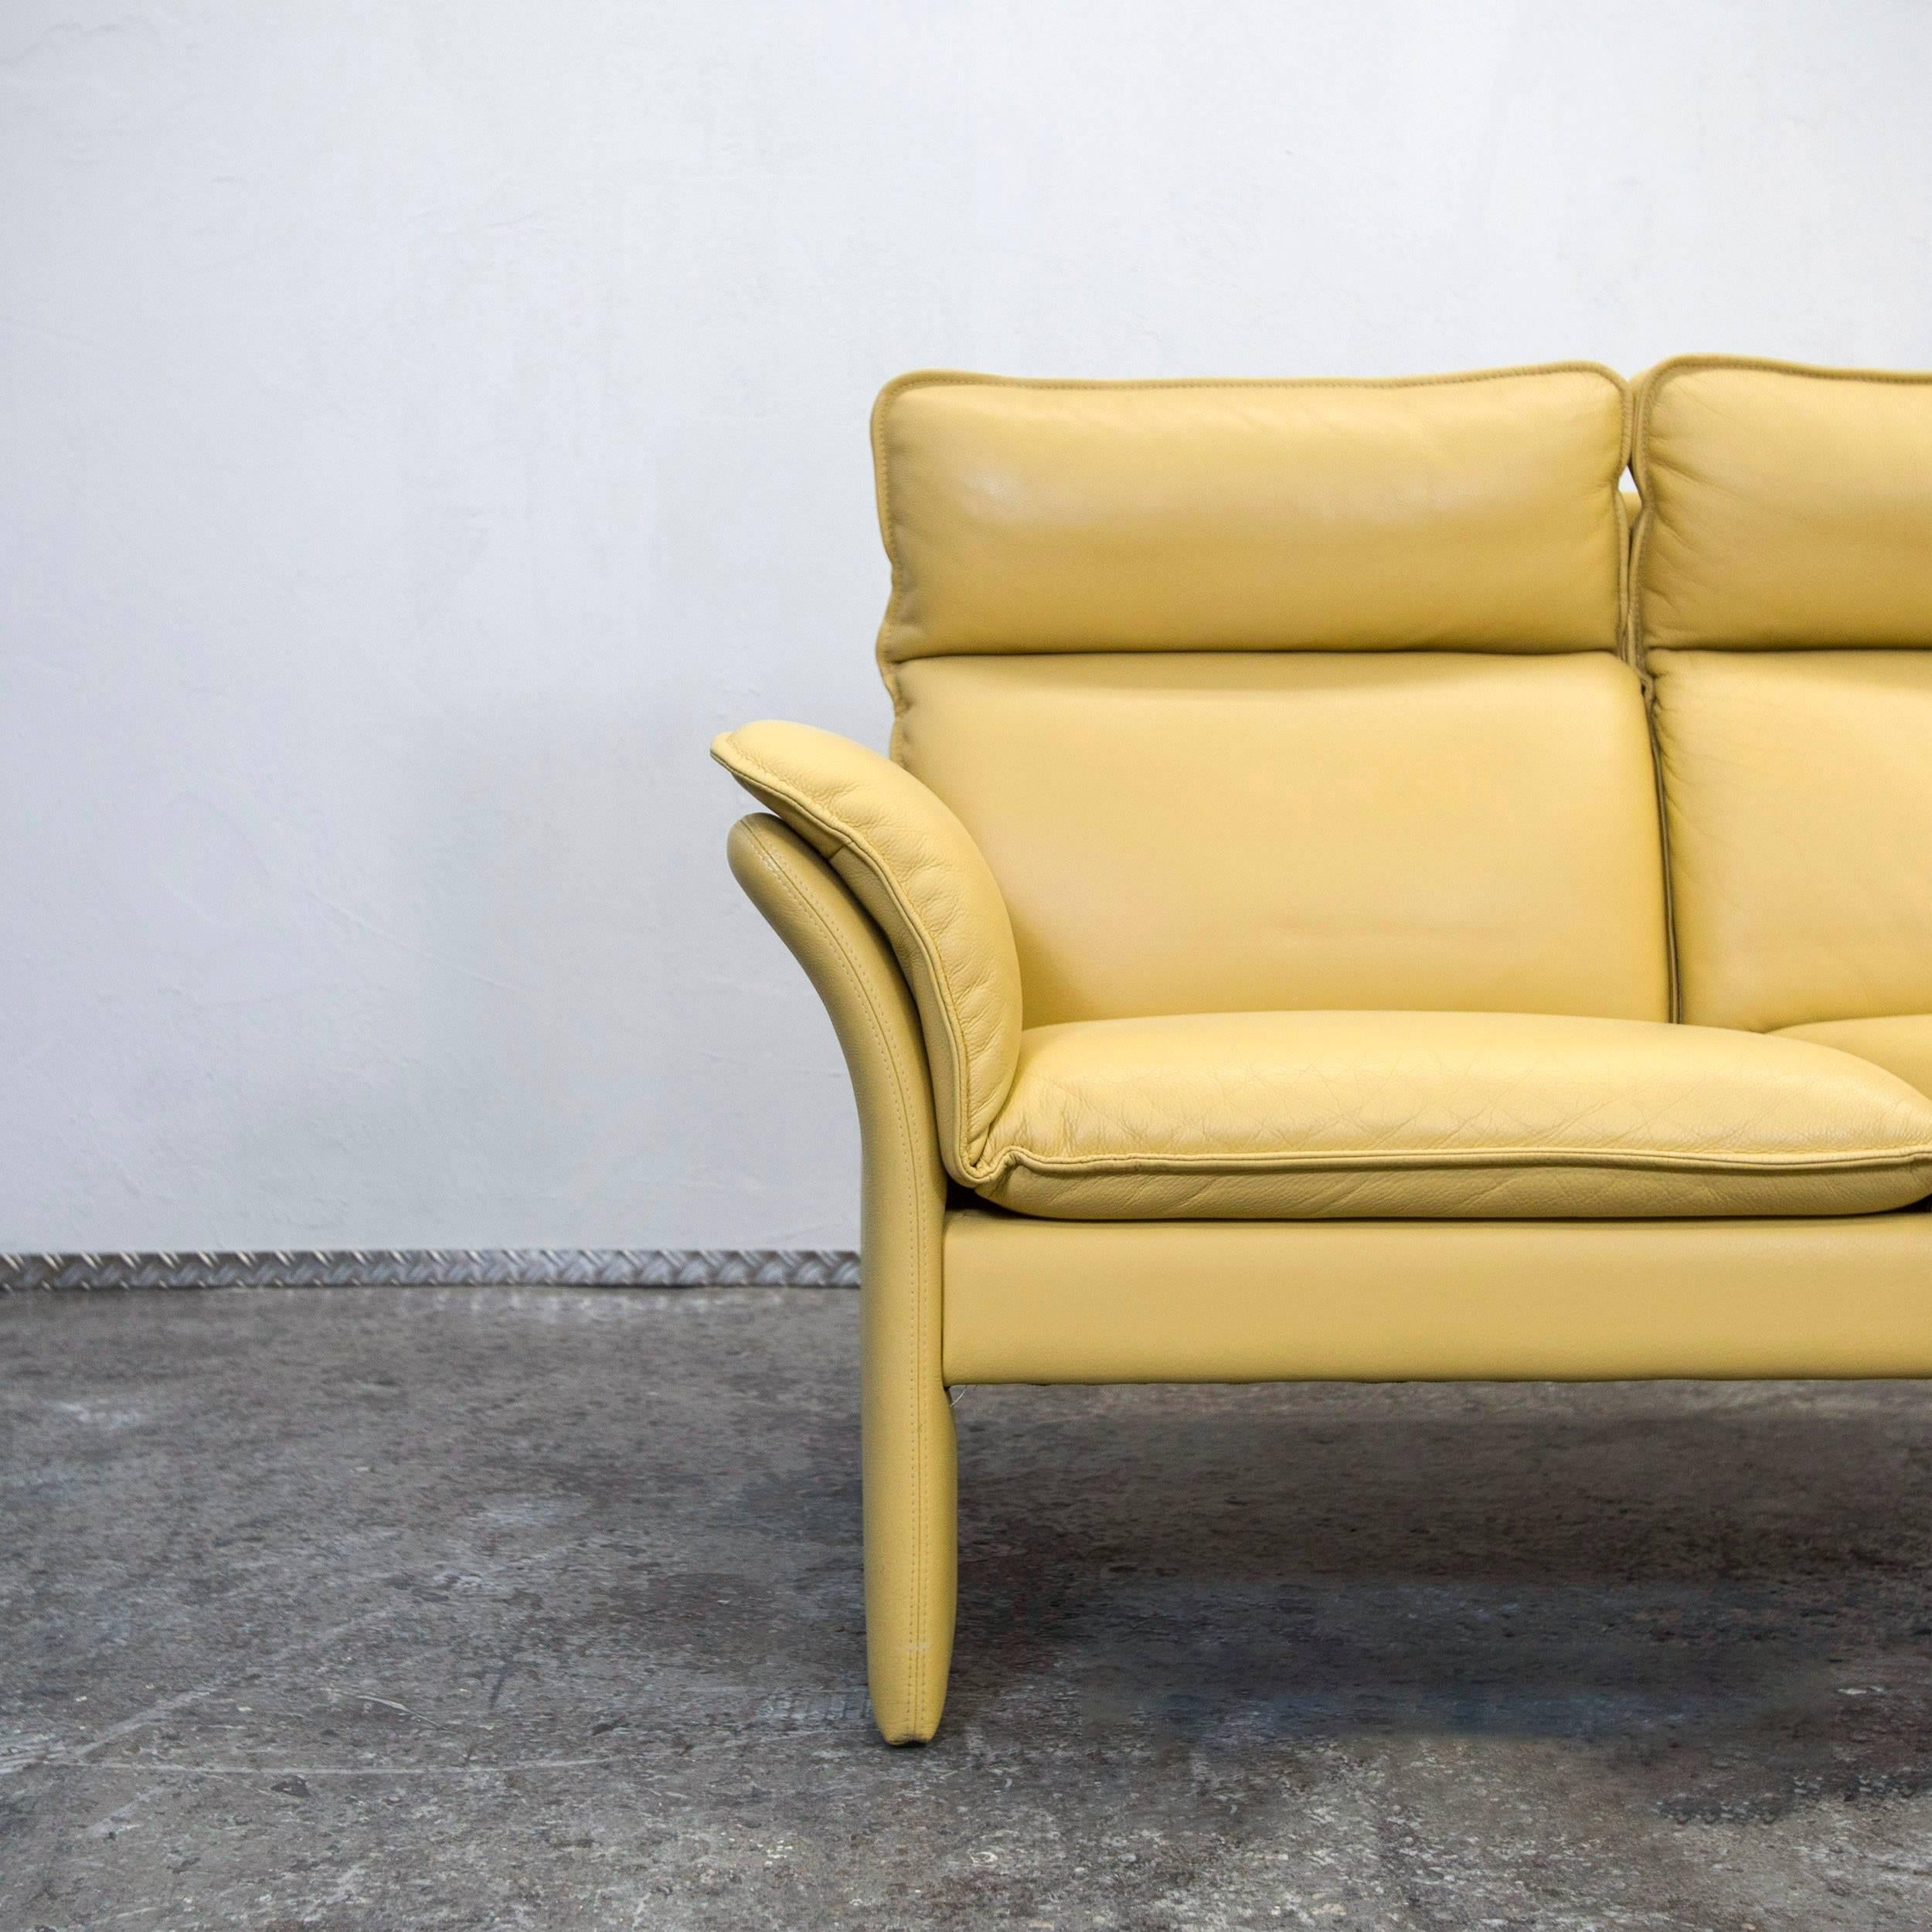 Mustard yellow colored original Dreipunkt designer leather sofa in a modern design, made for pure comfort.